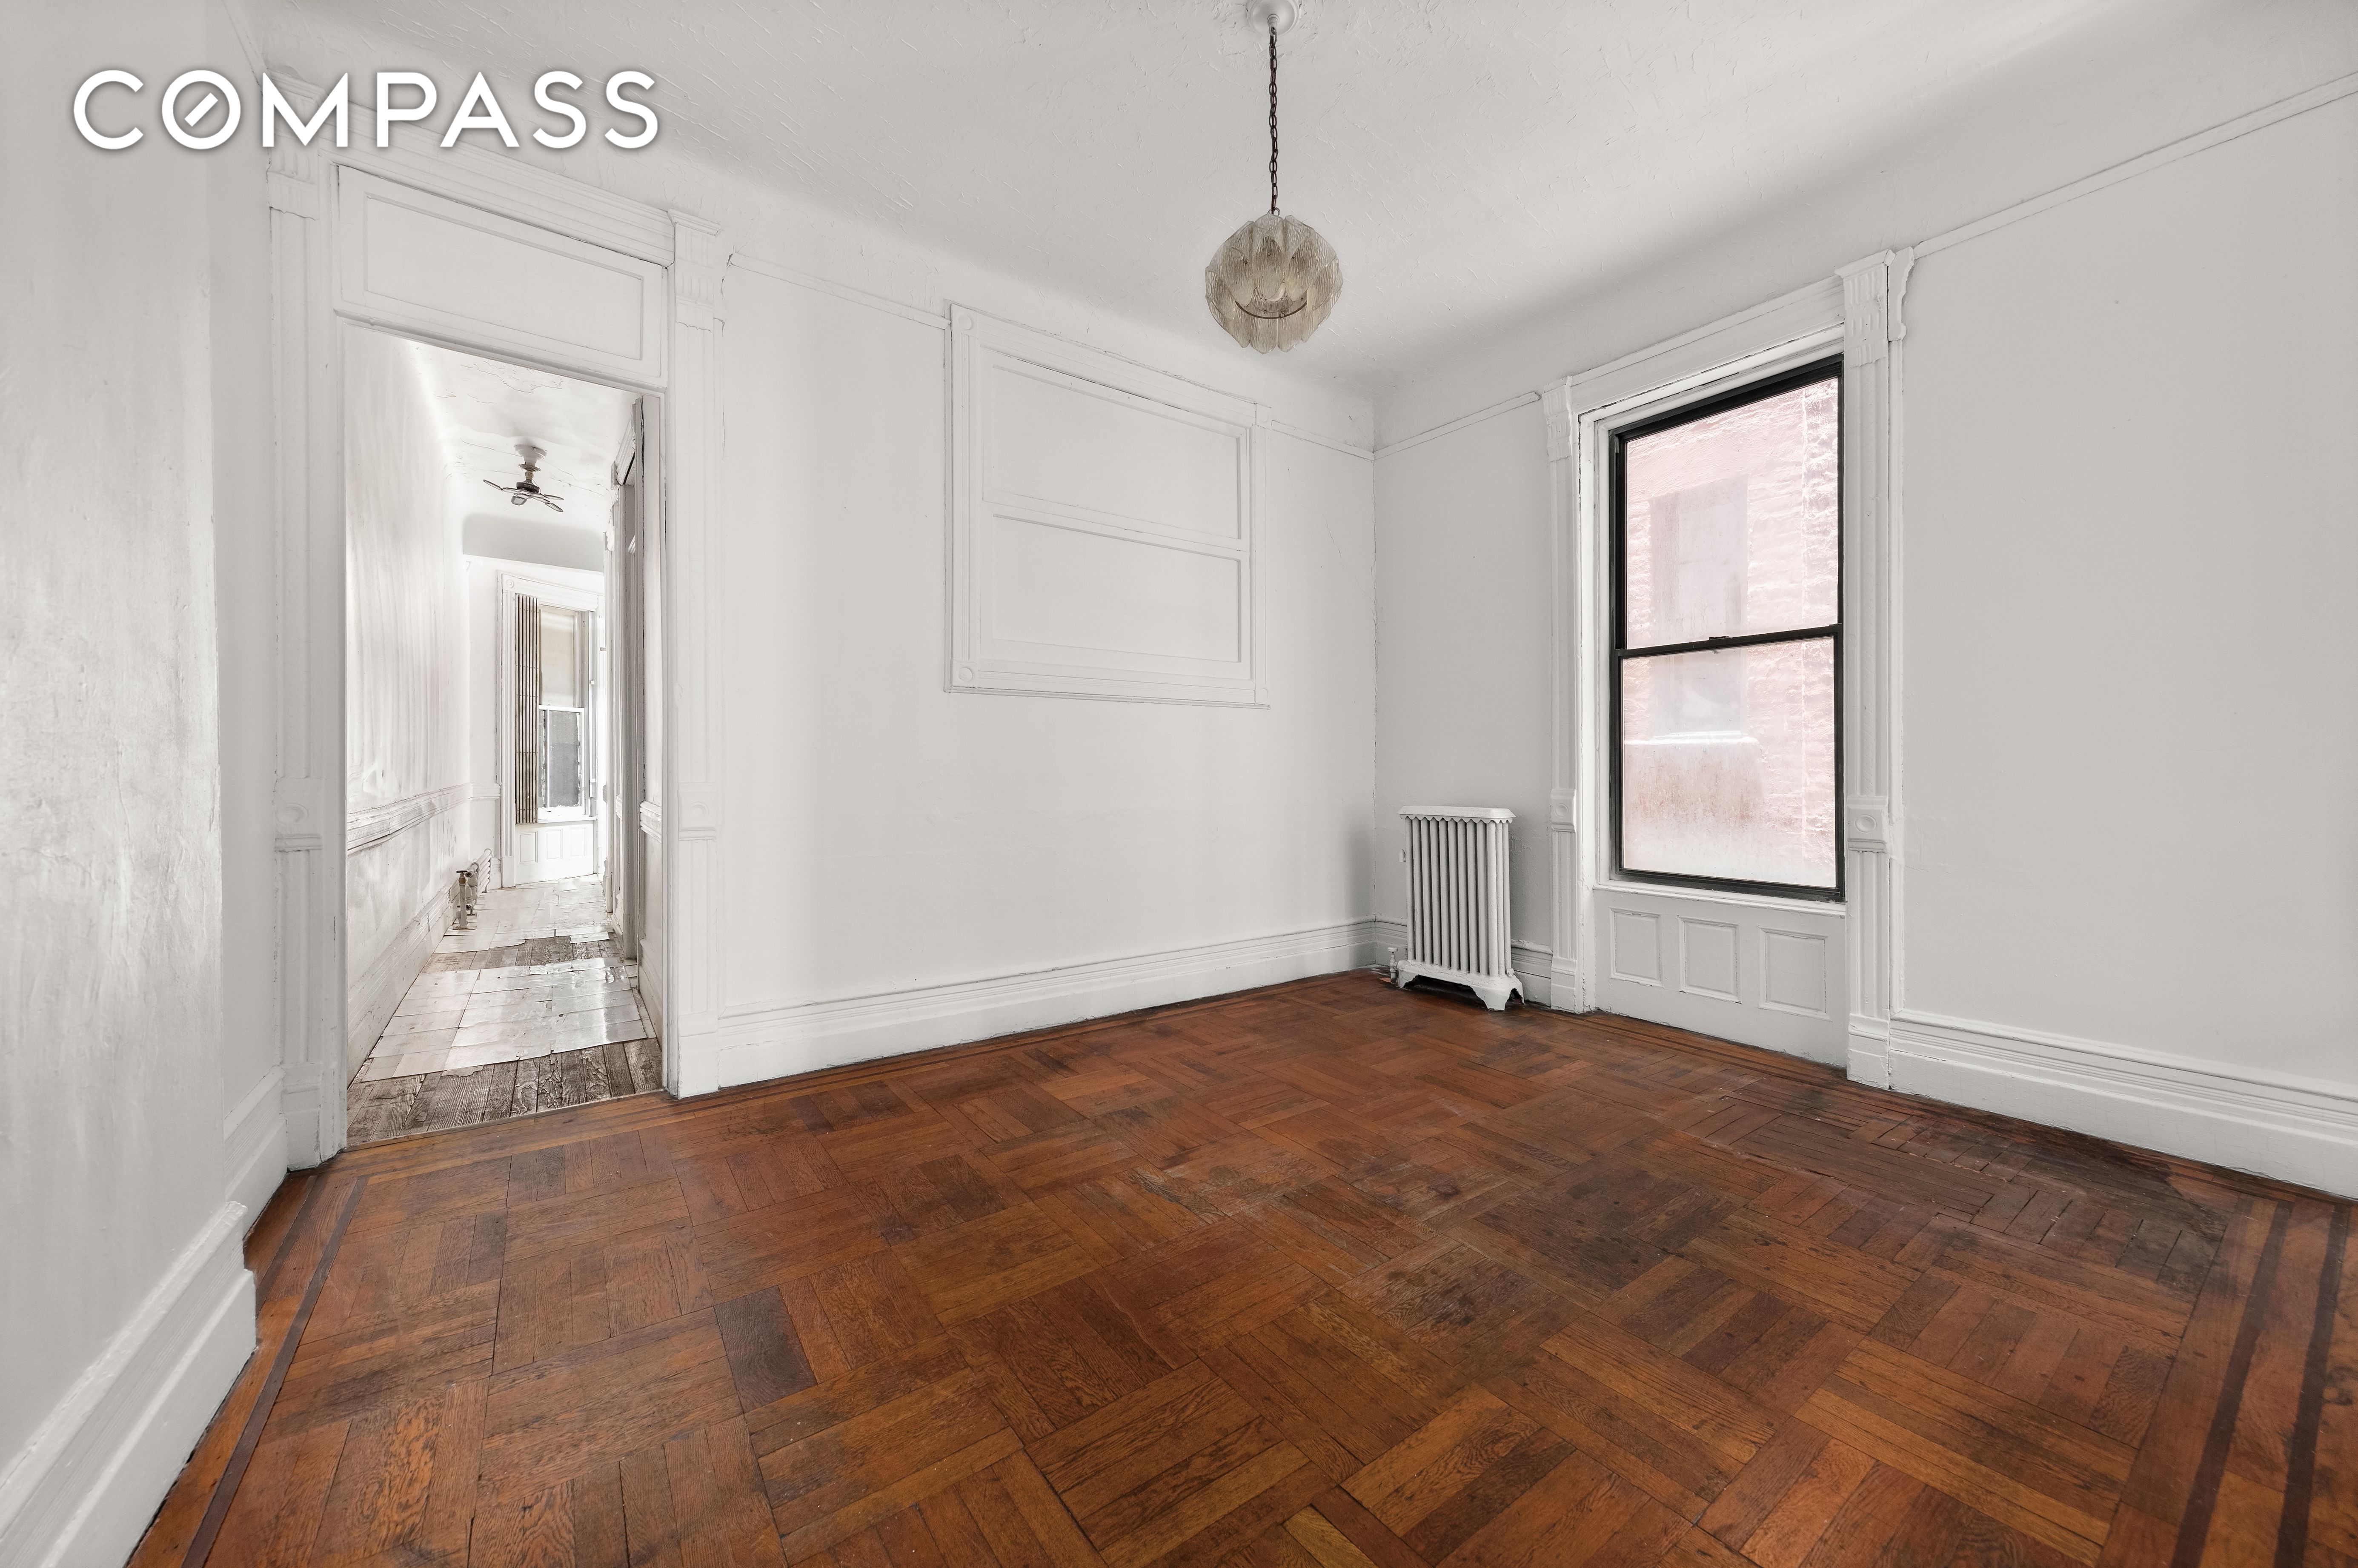 202 West 78th Street 2E, Upper West Side, Upper West Side, NYC - 2 Bedrooms  
2 Bathrooms  
6 Rooms - 